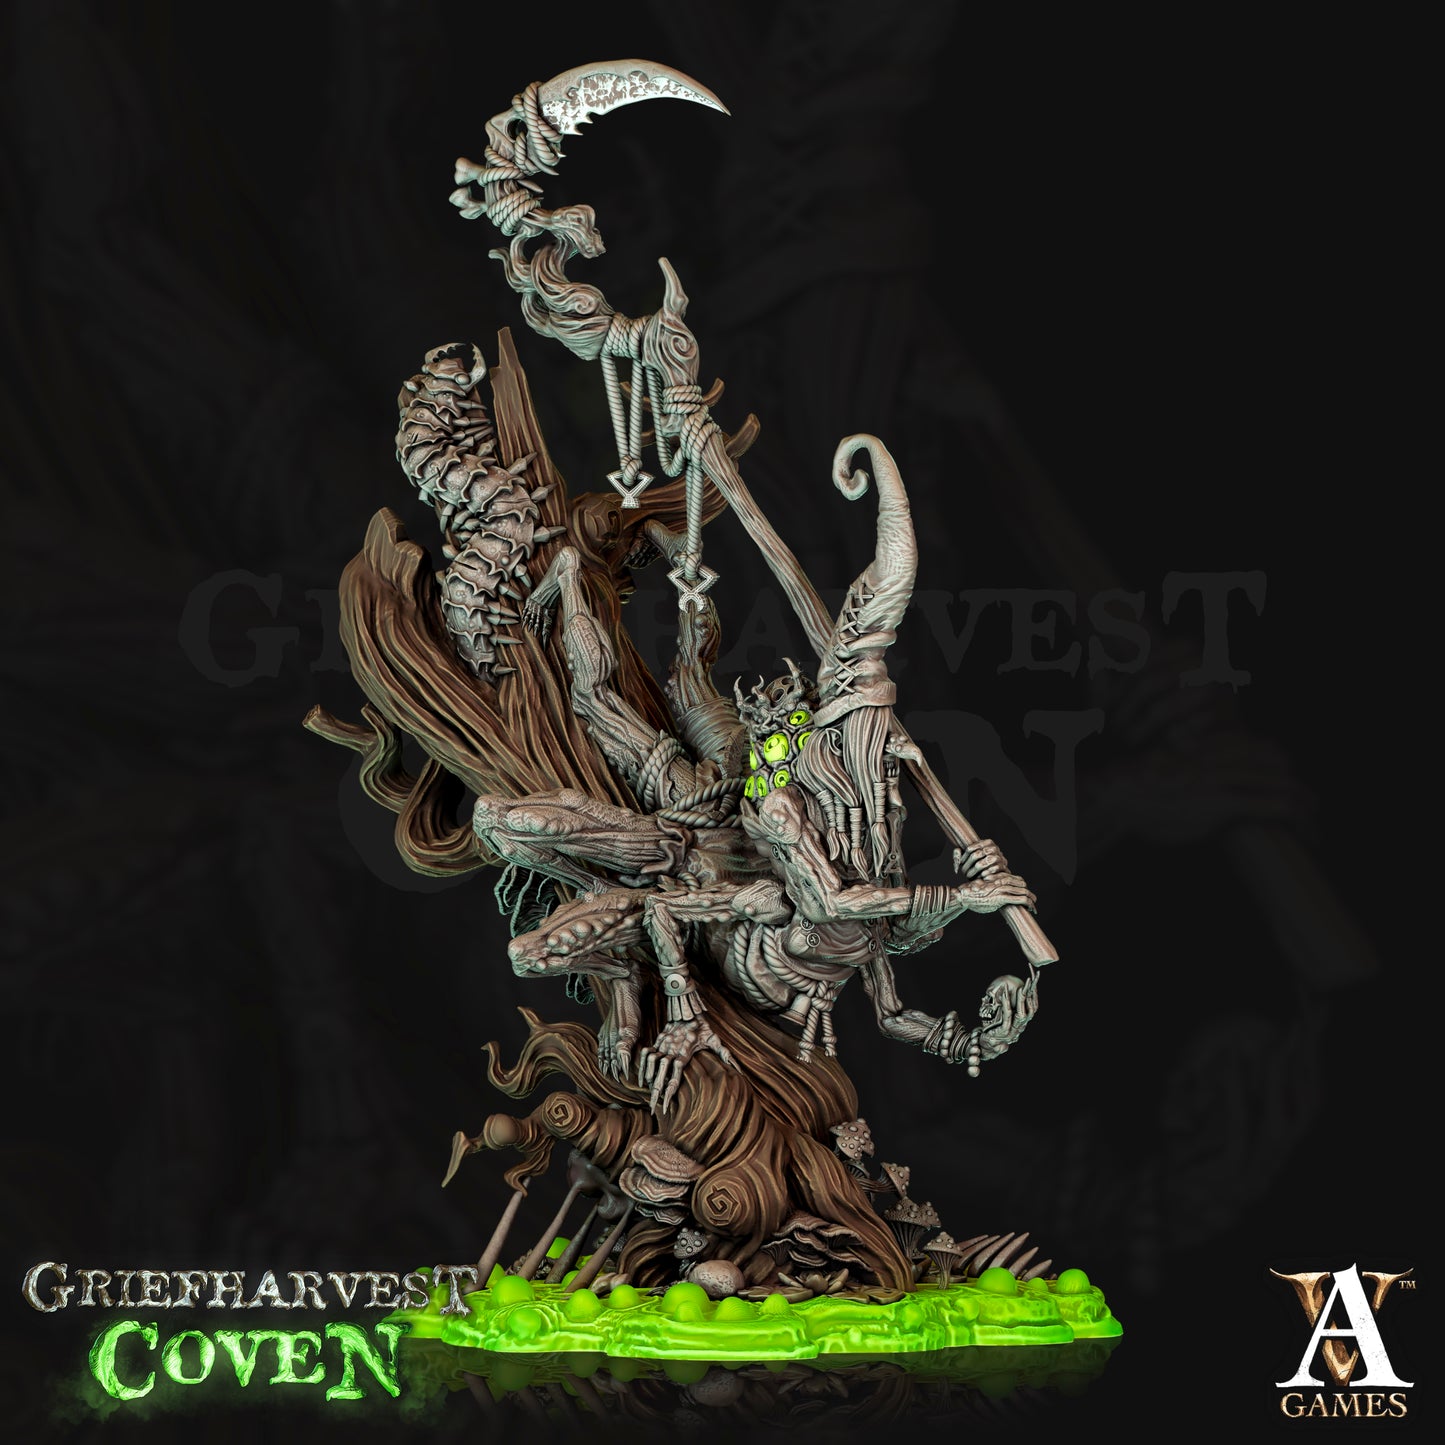 Hardibeth - Whisper of the Woods - GRIEFHARVEST COVEN IS UNLEASHED